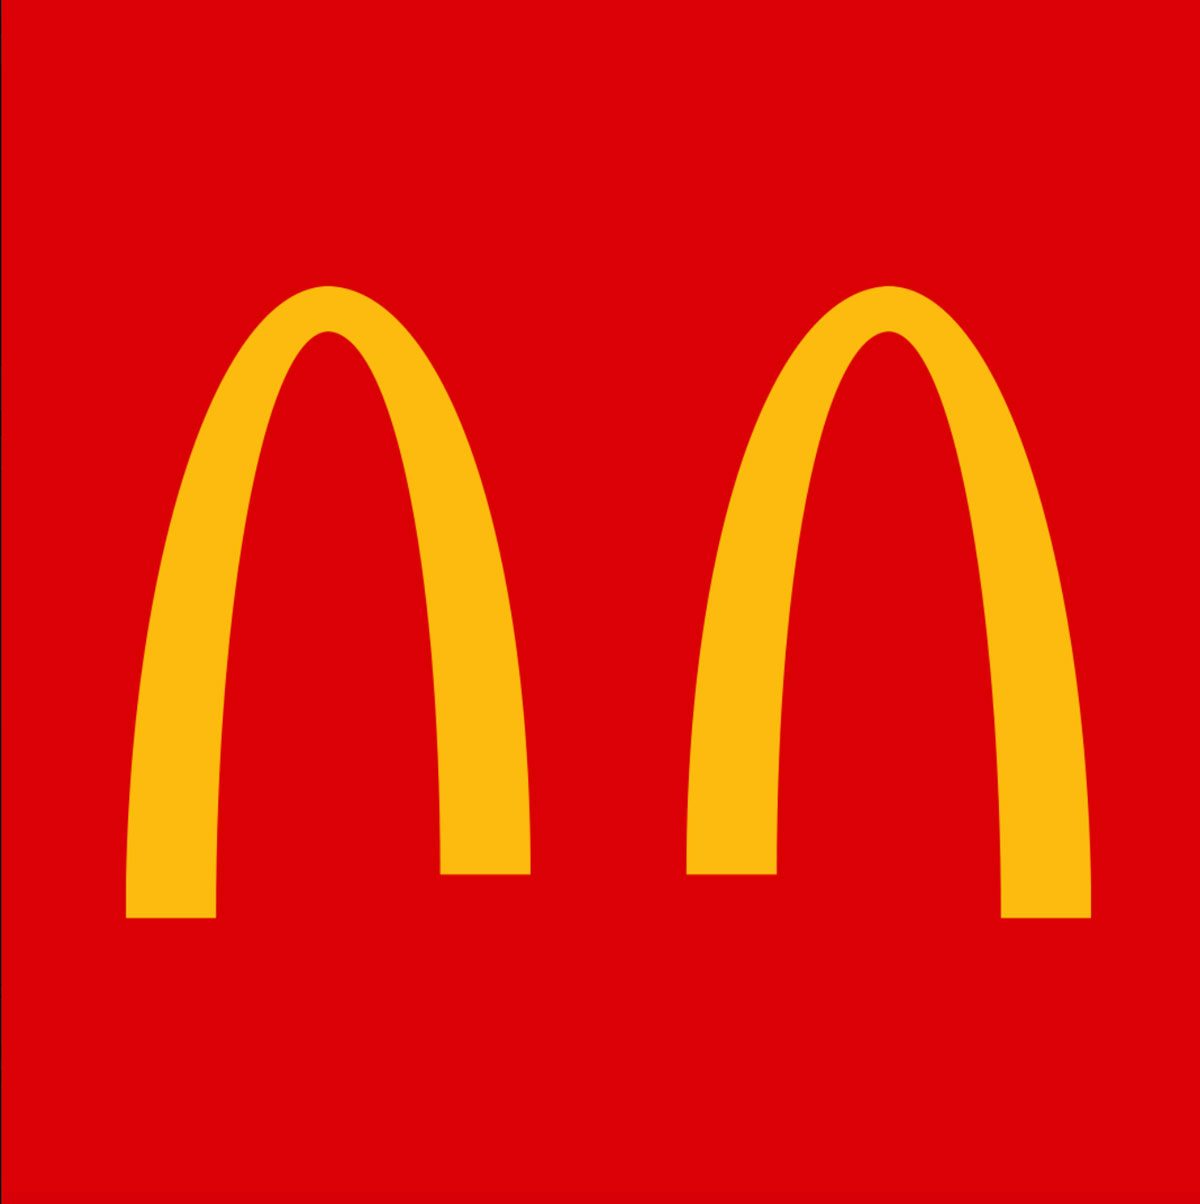 McDonald’s reimagines its logo for our new Covid19 reality